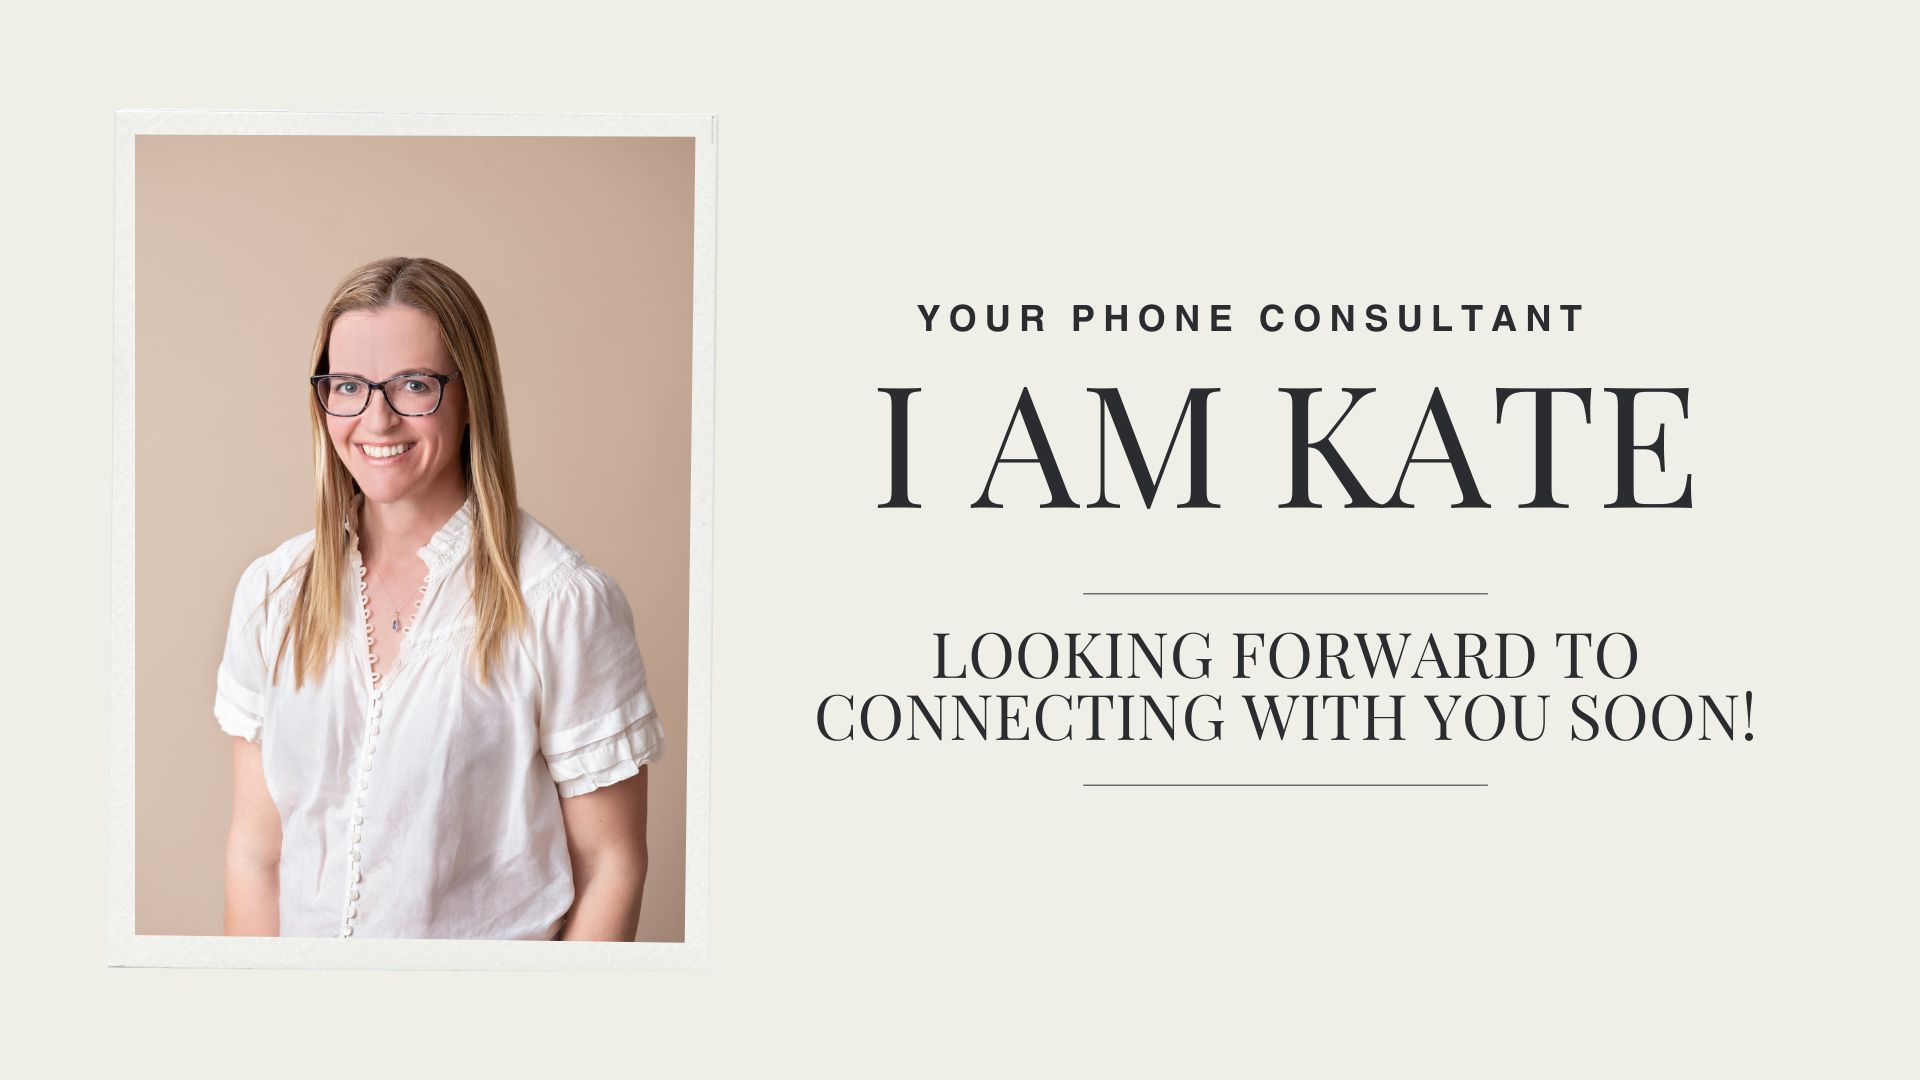 I am Kate, your phone consultant. Looking forward to connecting with you soon!